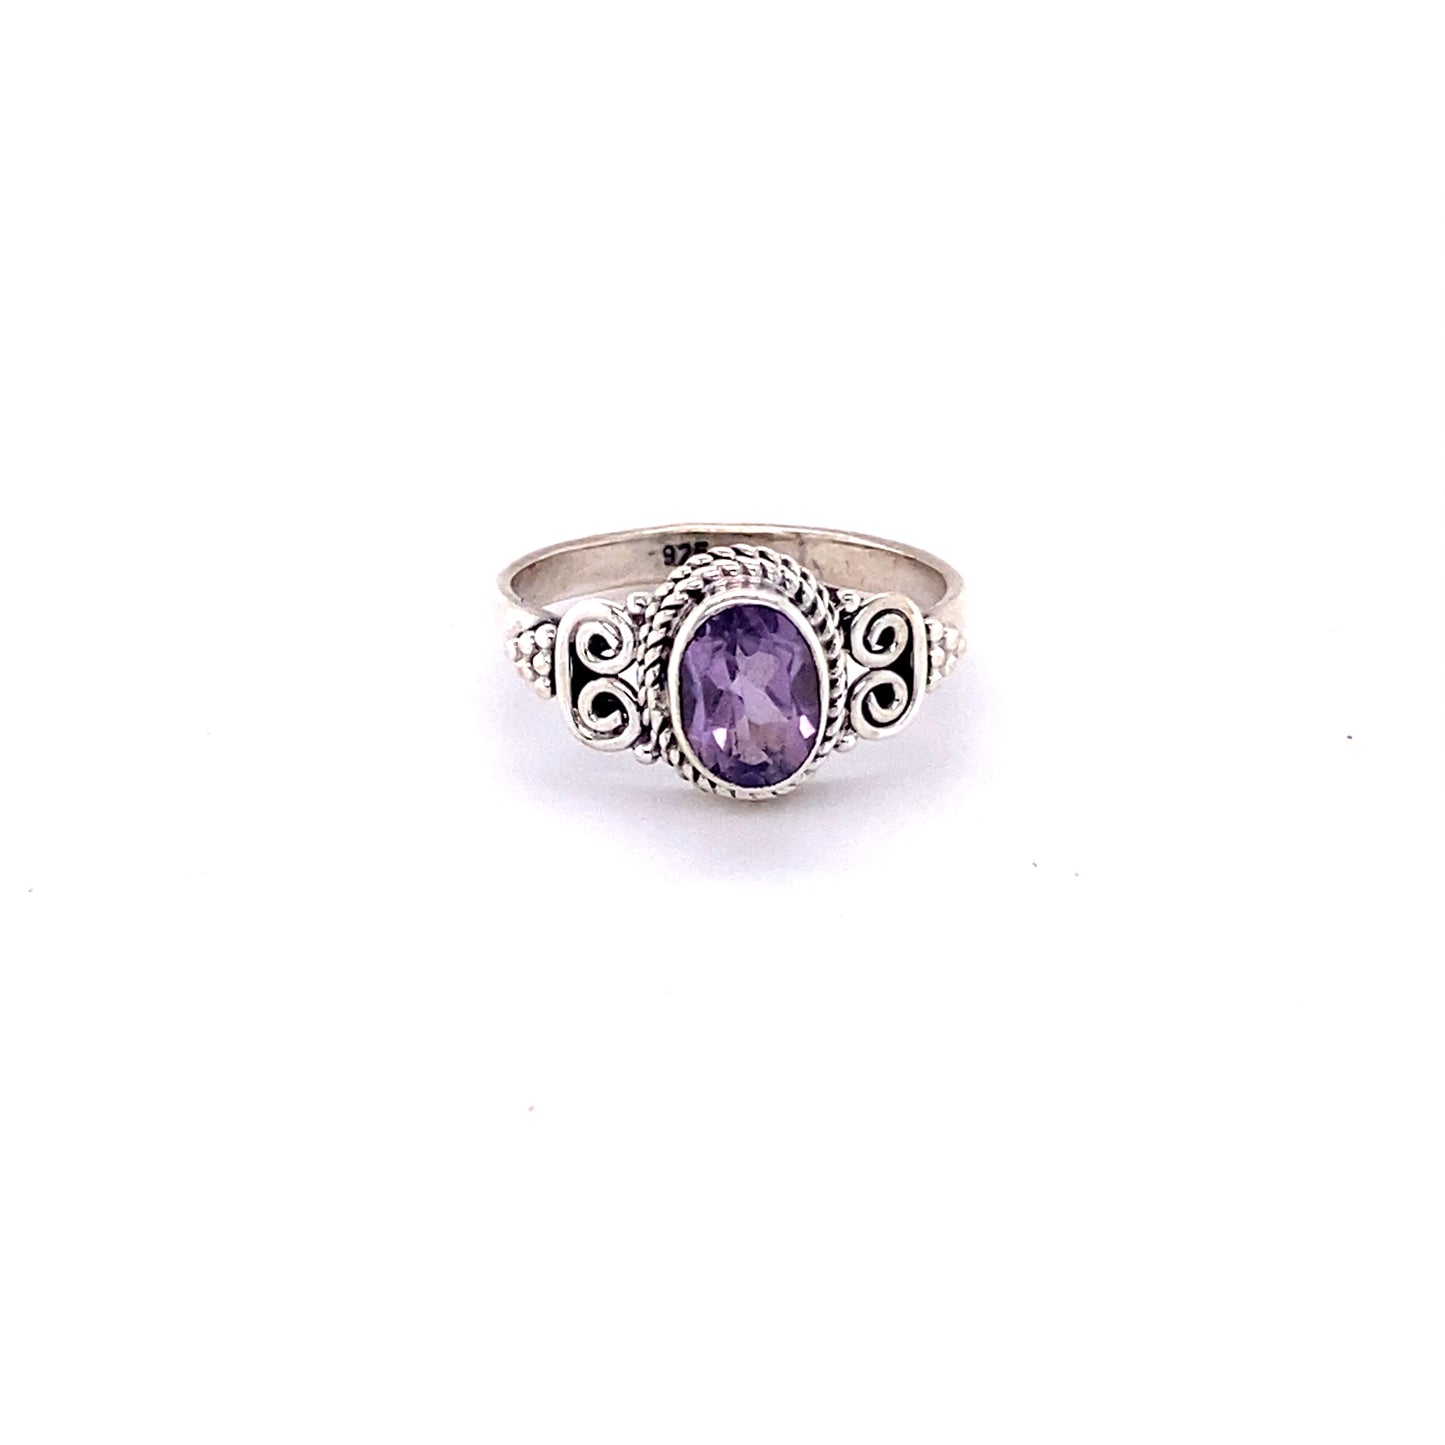 
                  
                    Oval Faceted Gemstone Ring with a Swirl Design: A silver ring with a cabochon amethyst stone.
                  
                